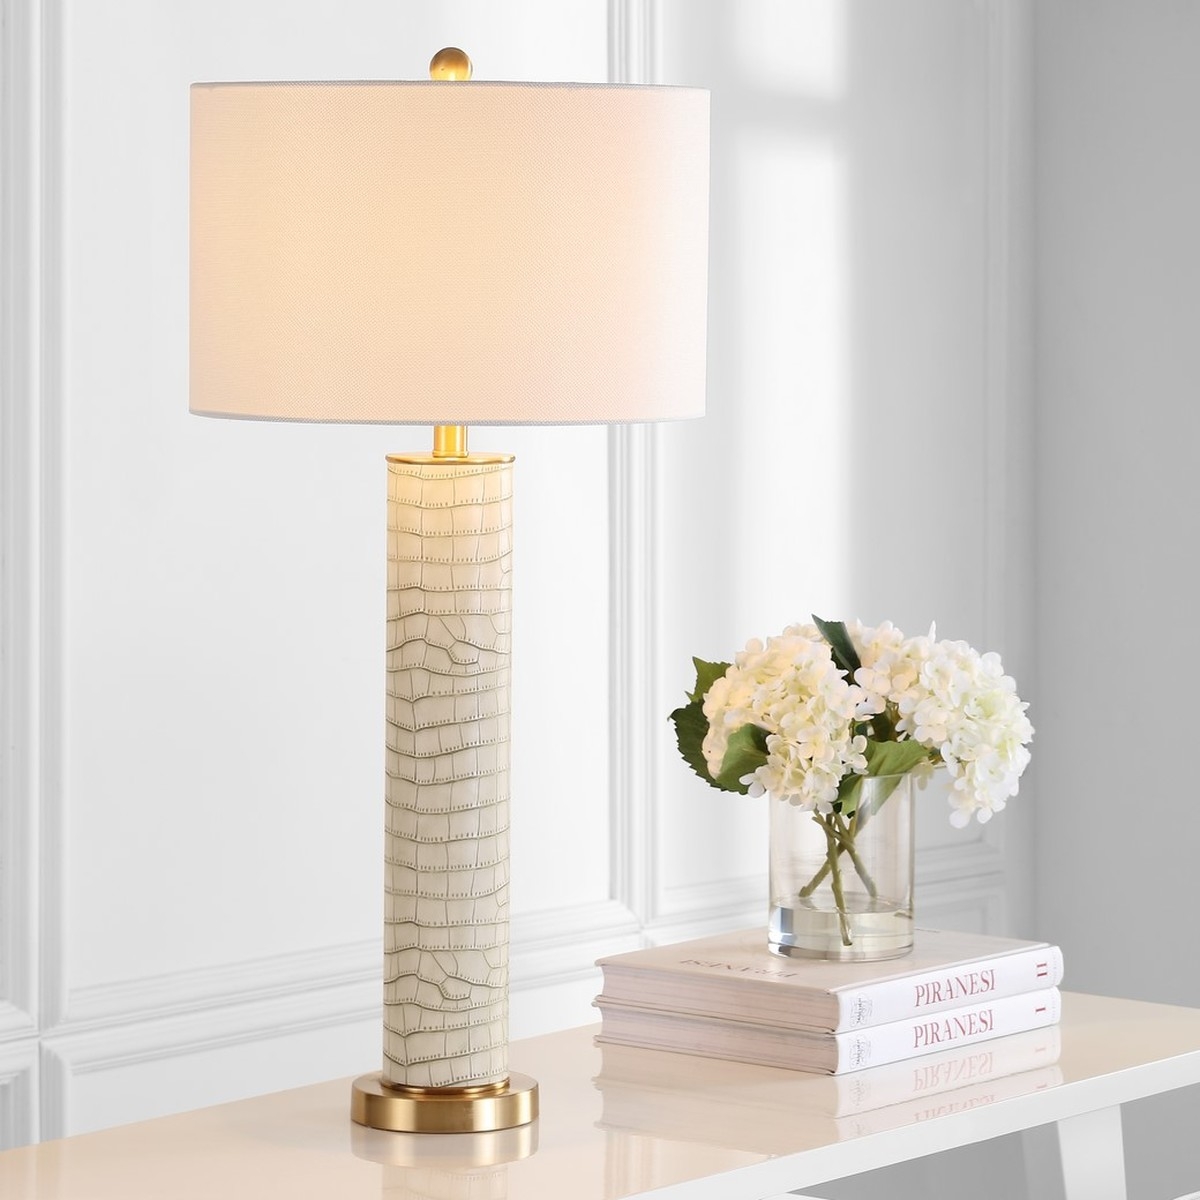 Ollie 31.5-Inch H Faux Alligator Table Lamp - Cream - Arlo Home - Image 2